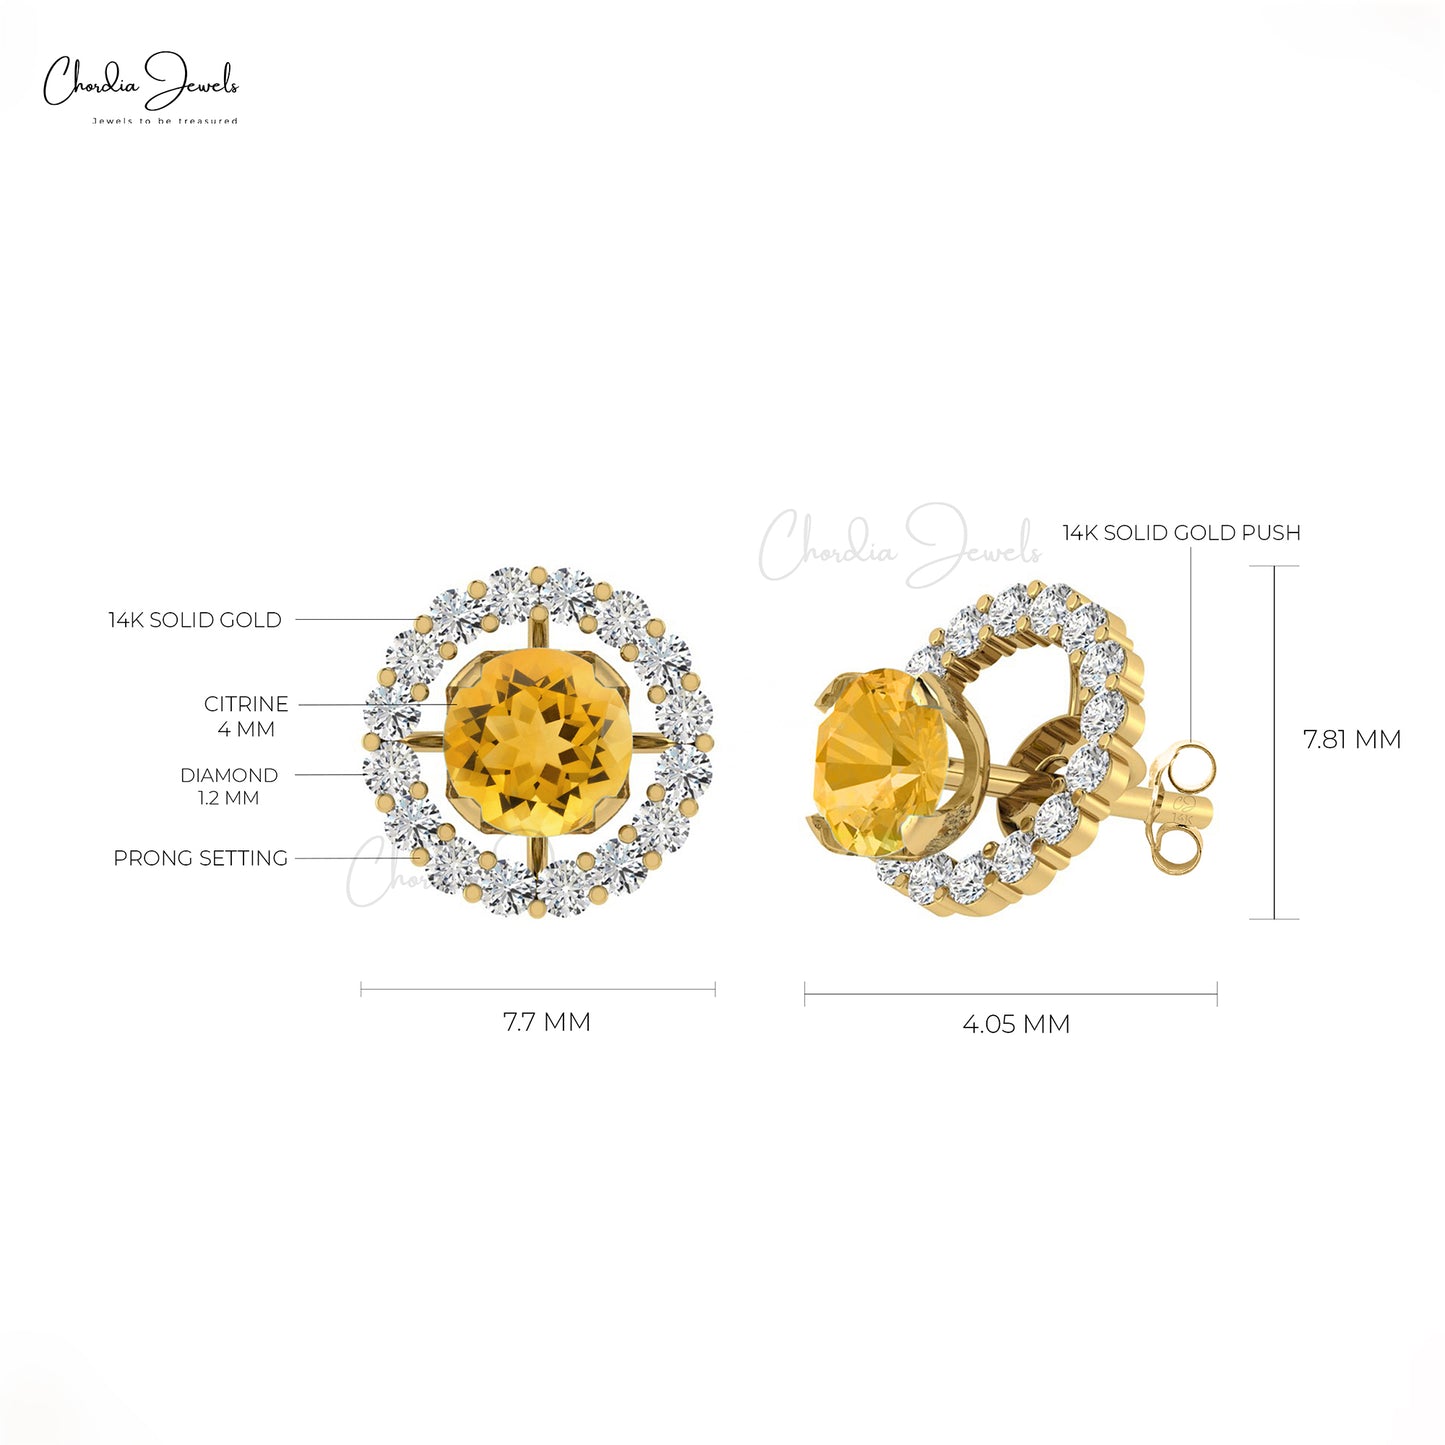 Delicate Citrine Dainty Earrings 4mm Brilliant Round Cut Gemstone Push Back Earrings Genuine 14k Real Gold Diamond Jewelry For Fiance Gift